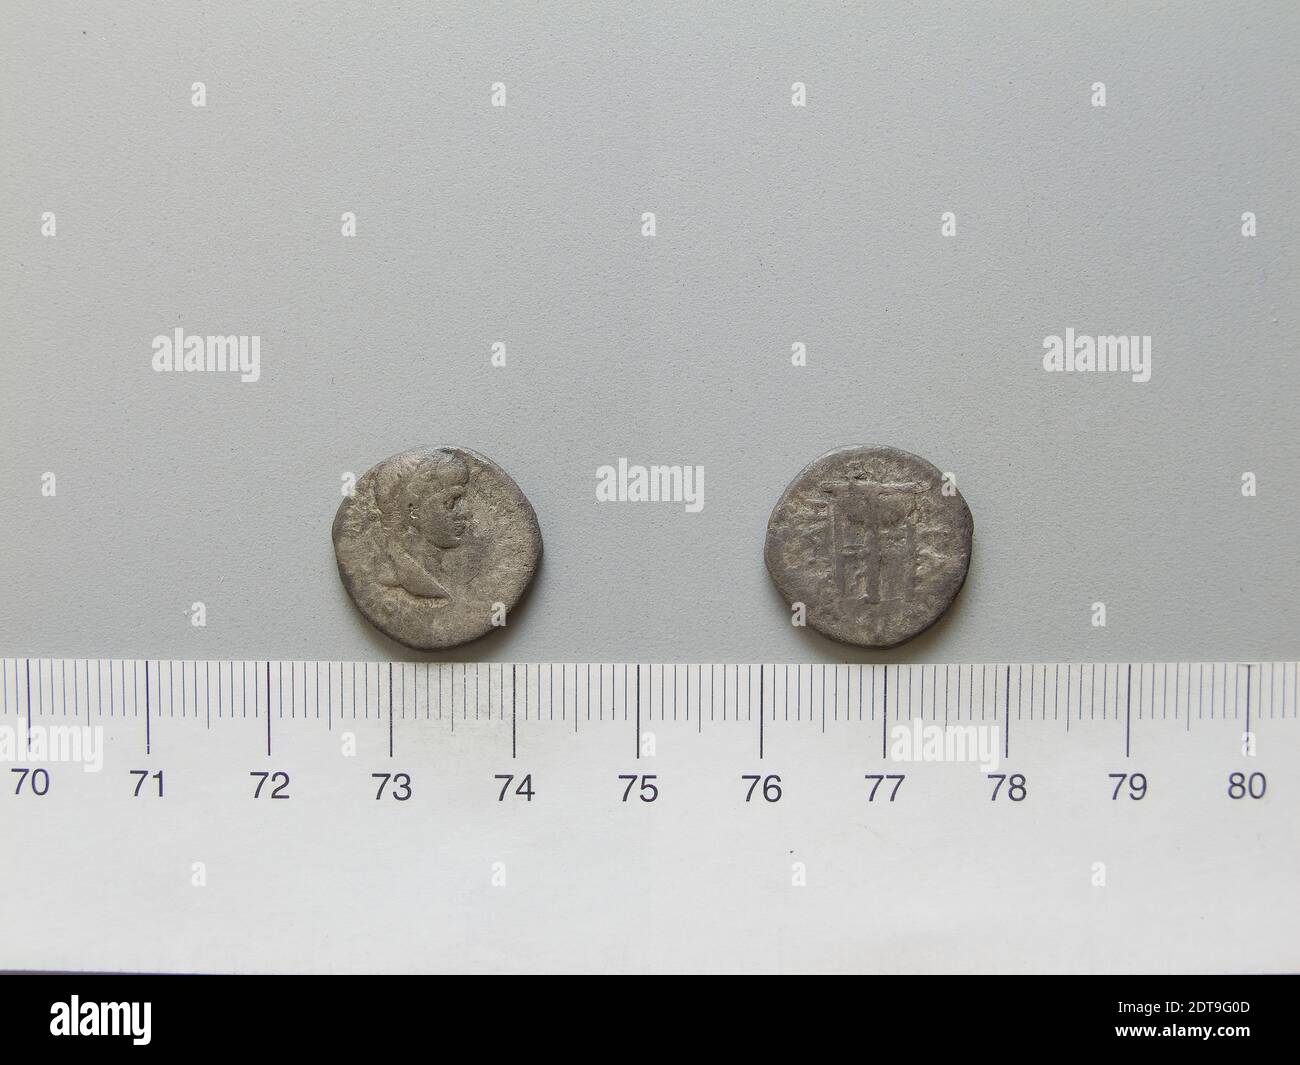 Ruler: Nero, Emperor of Rome, Roman, A.D. 37–68, ruled A.D. 54–68, Mint: Antioch, 1 Drachm of Nero, Emperor of Rome from Antioch, A.D. 56–57, Silver, 3.34 g, 12:00, 16.5 mm, Made in Antioch, Syria, Greek, 1st century A.D., Numismatics Stock Photo